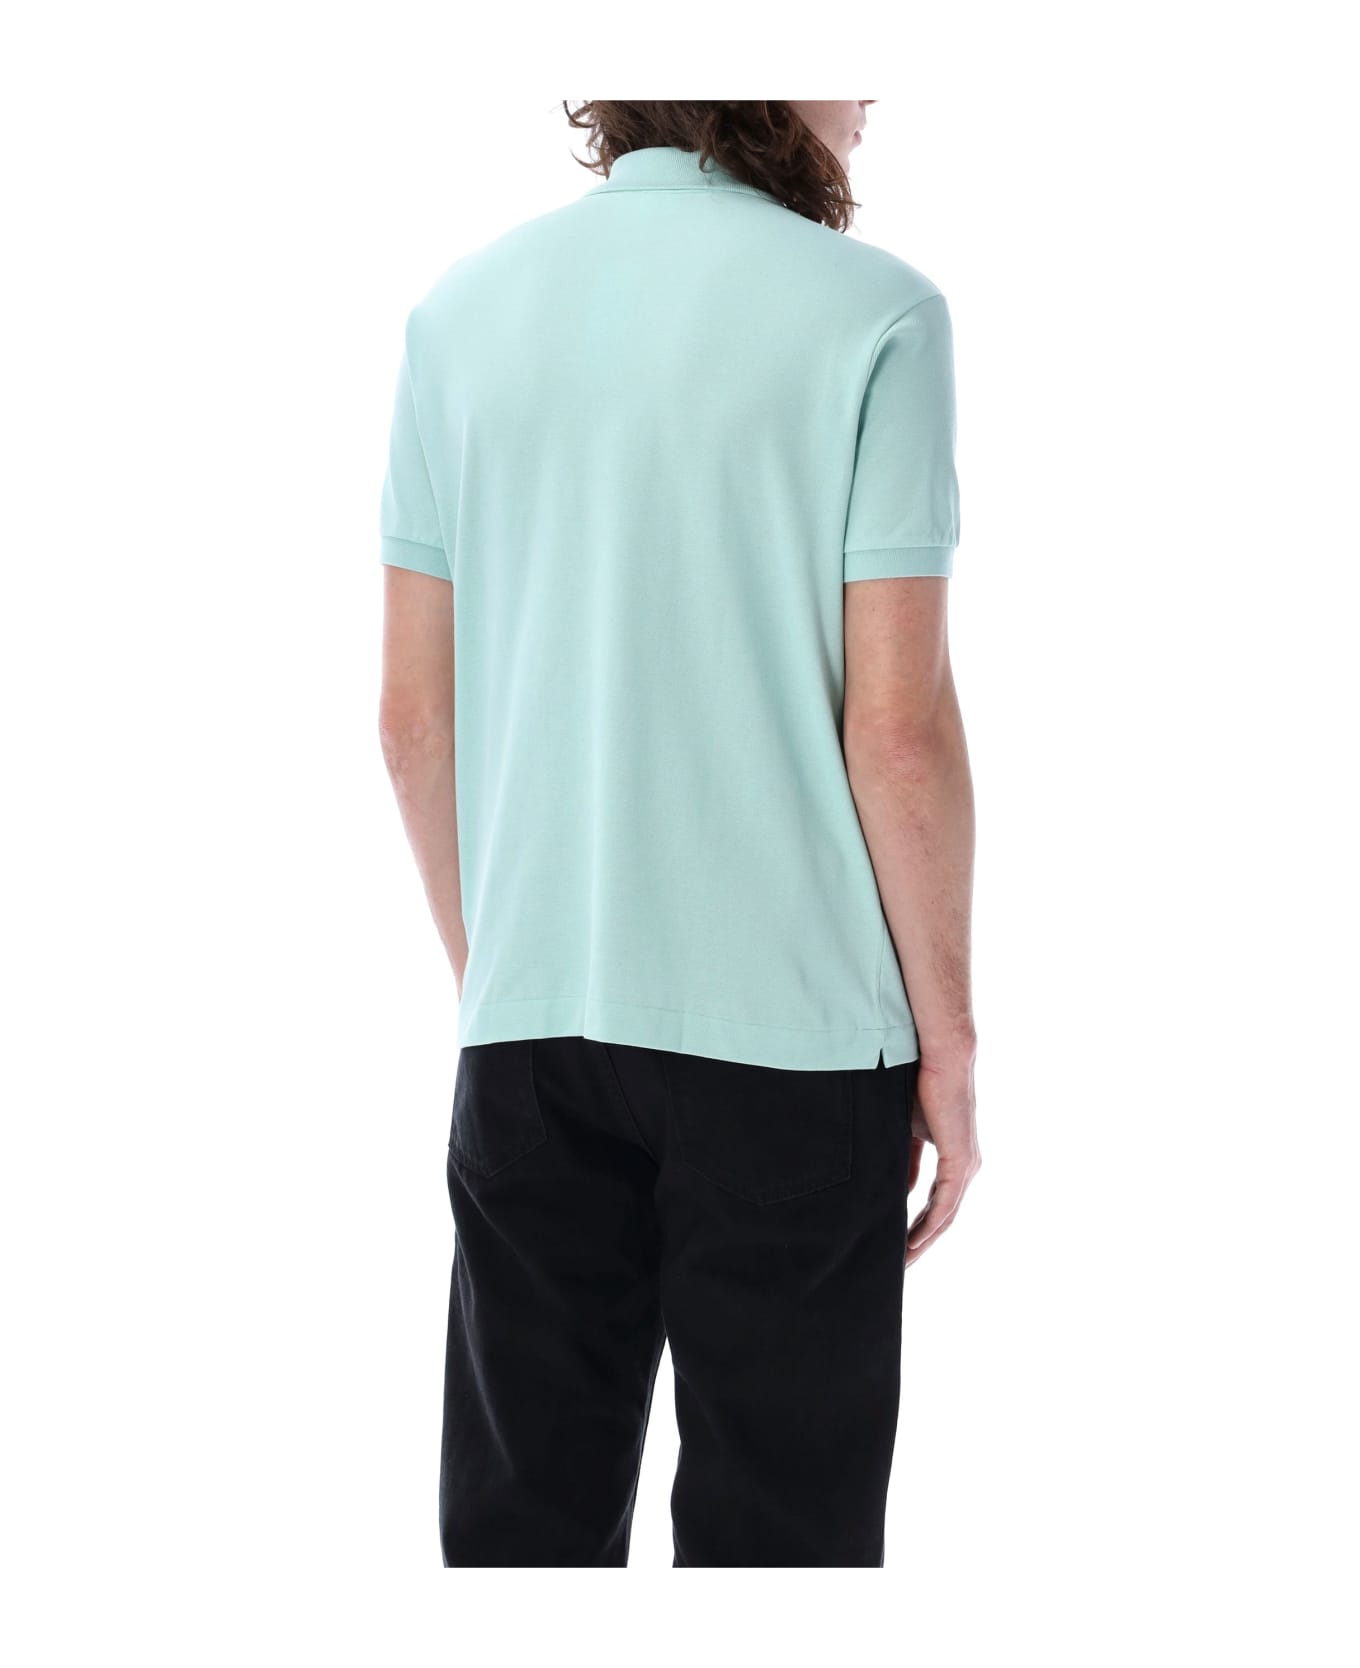 Lacoste Classic Fit Polo Shirt - LIGHT MINT ポロシャツ